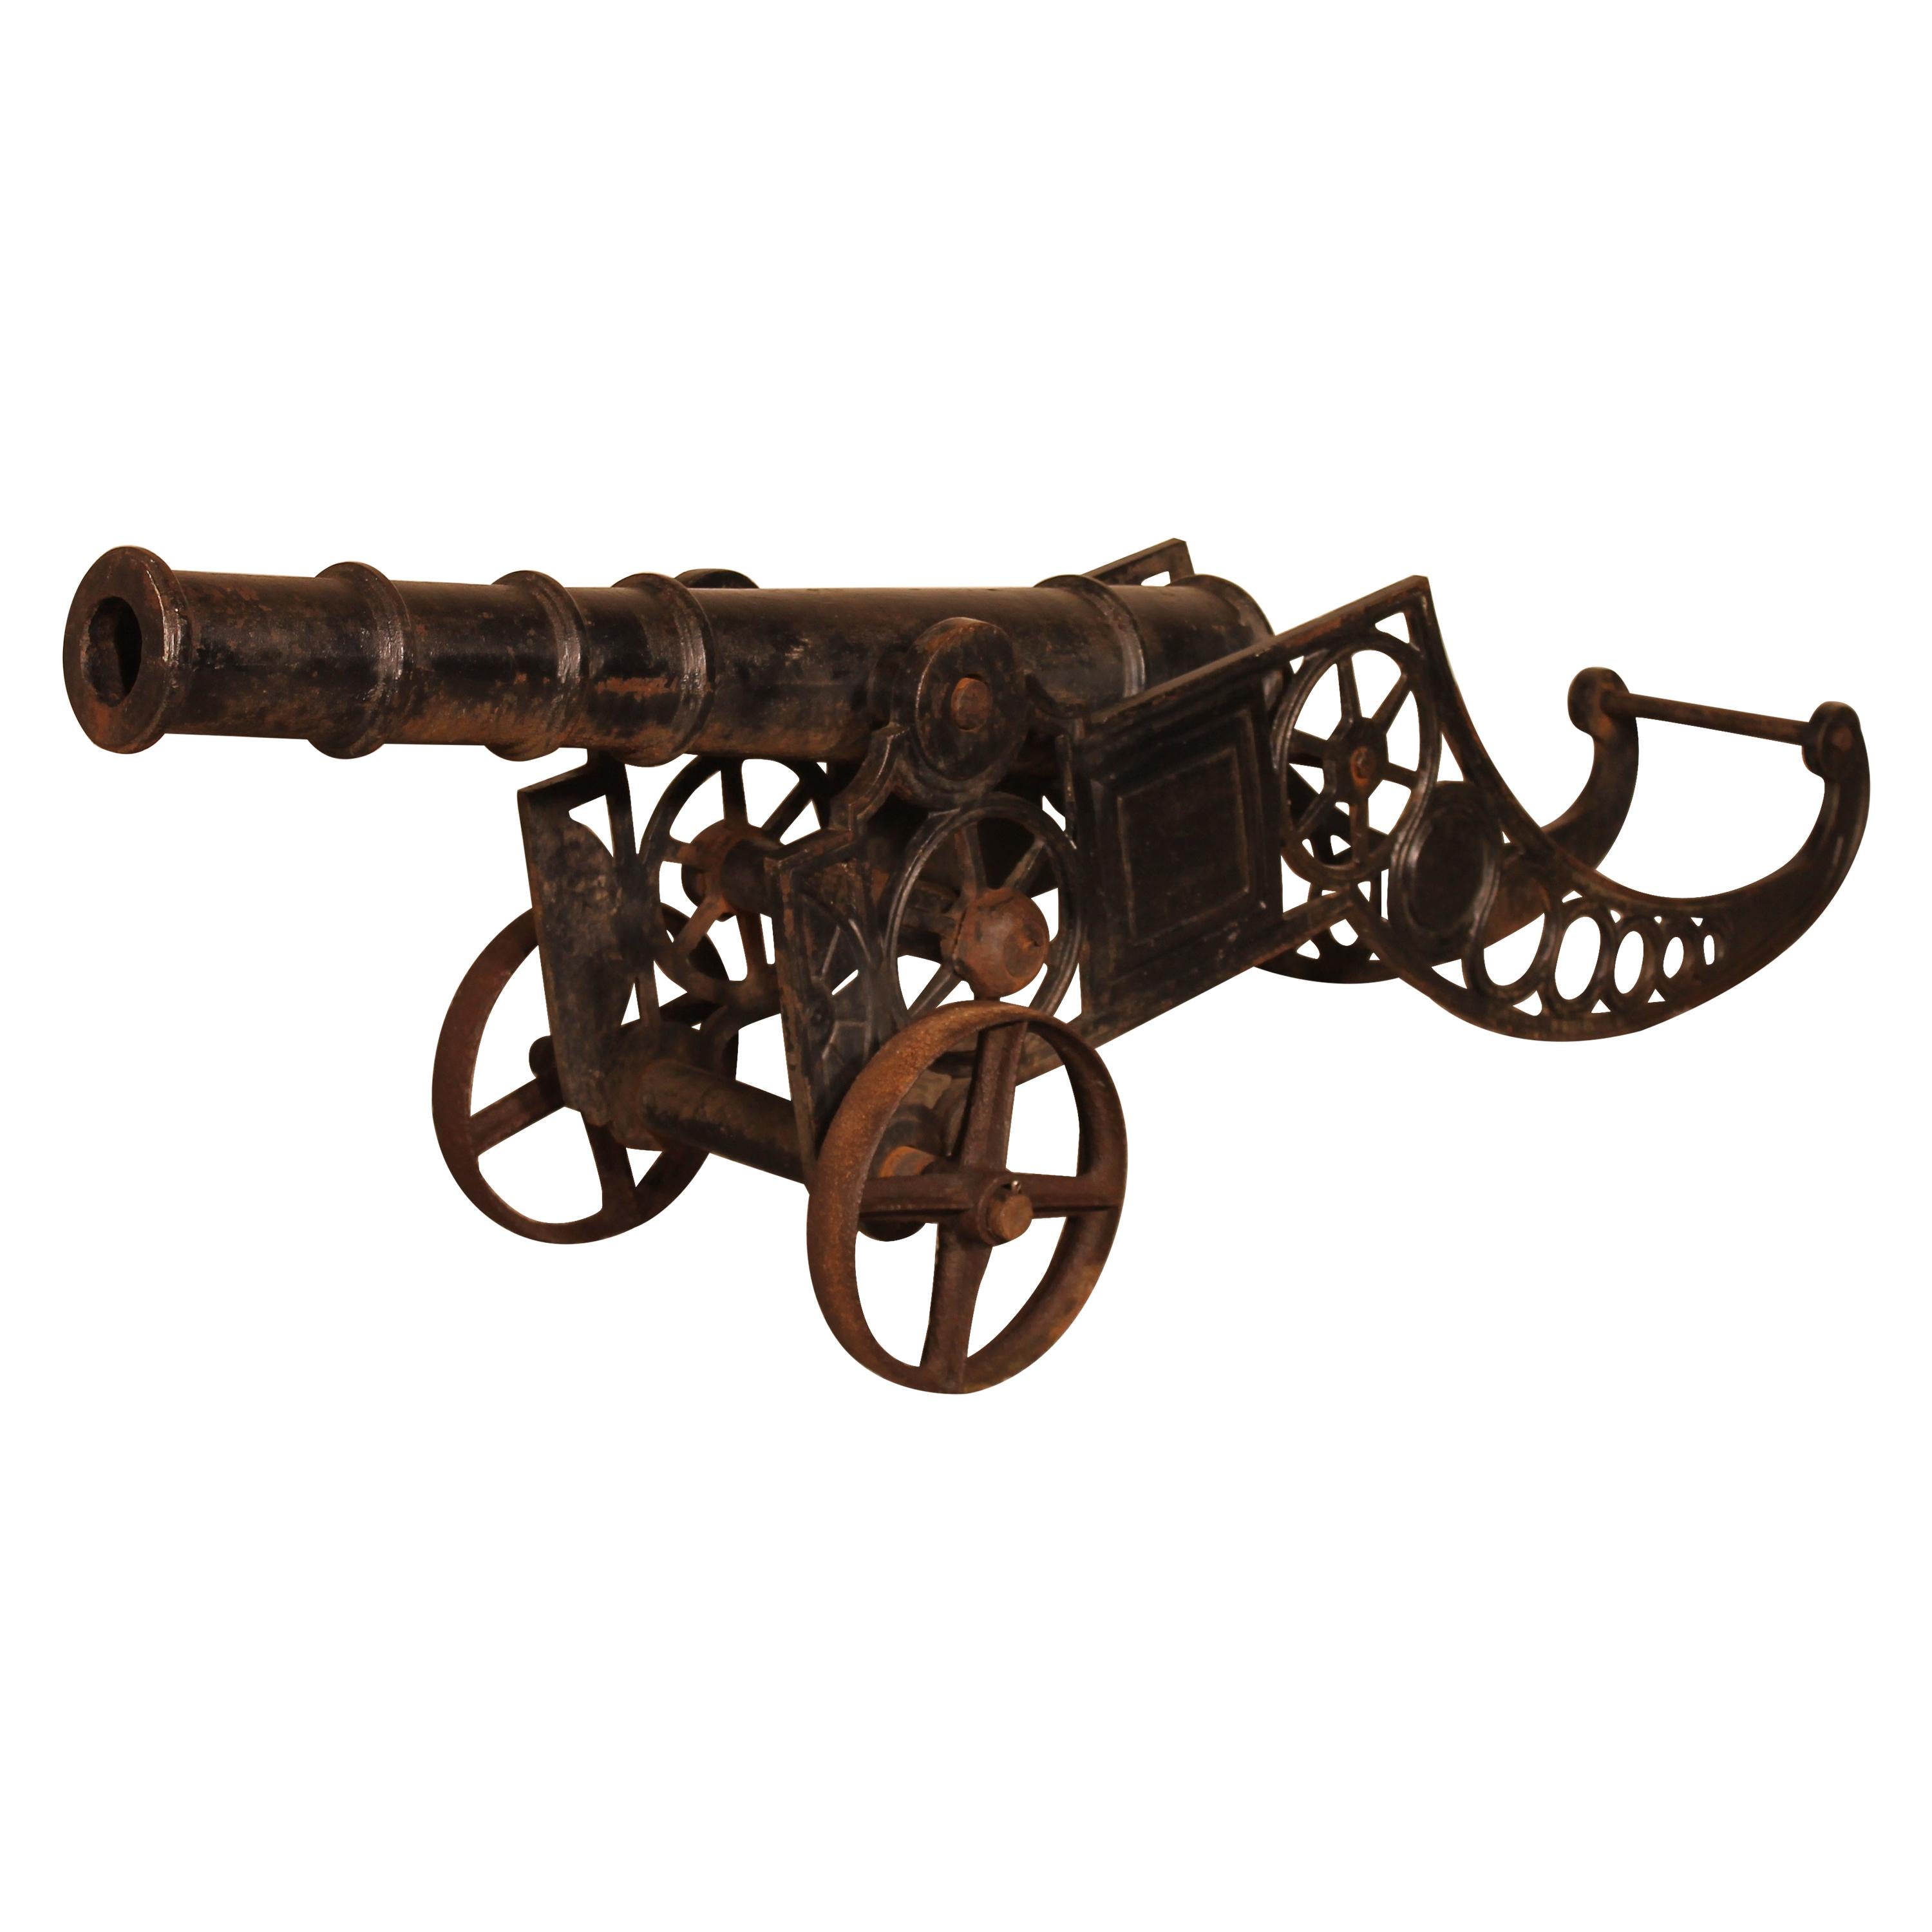 Details about   India Overseas Trading Wood Iron Cannon Replica 